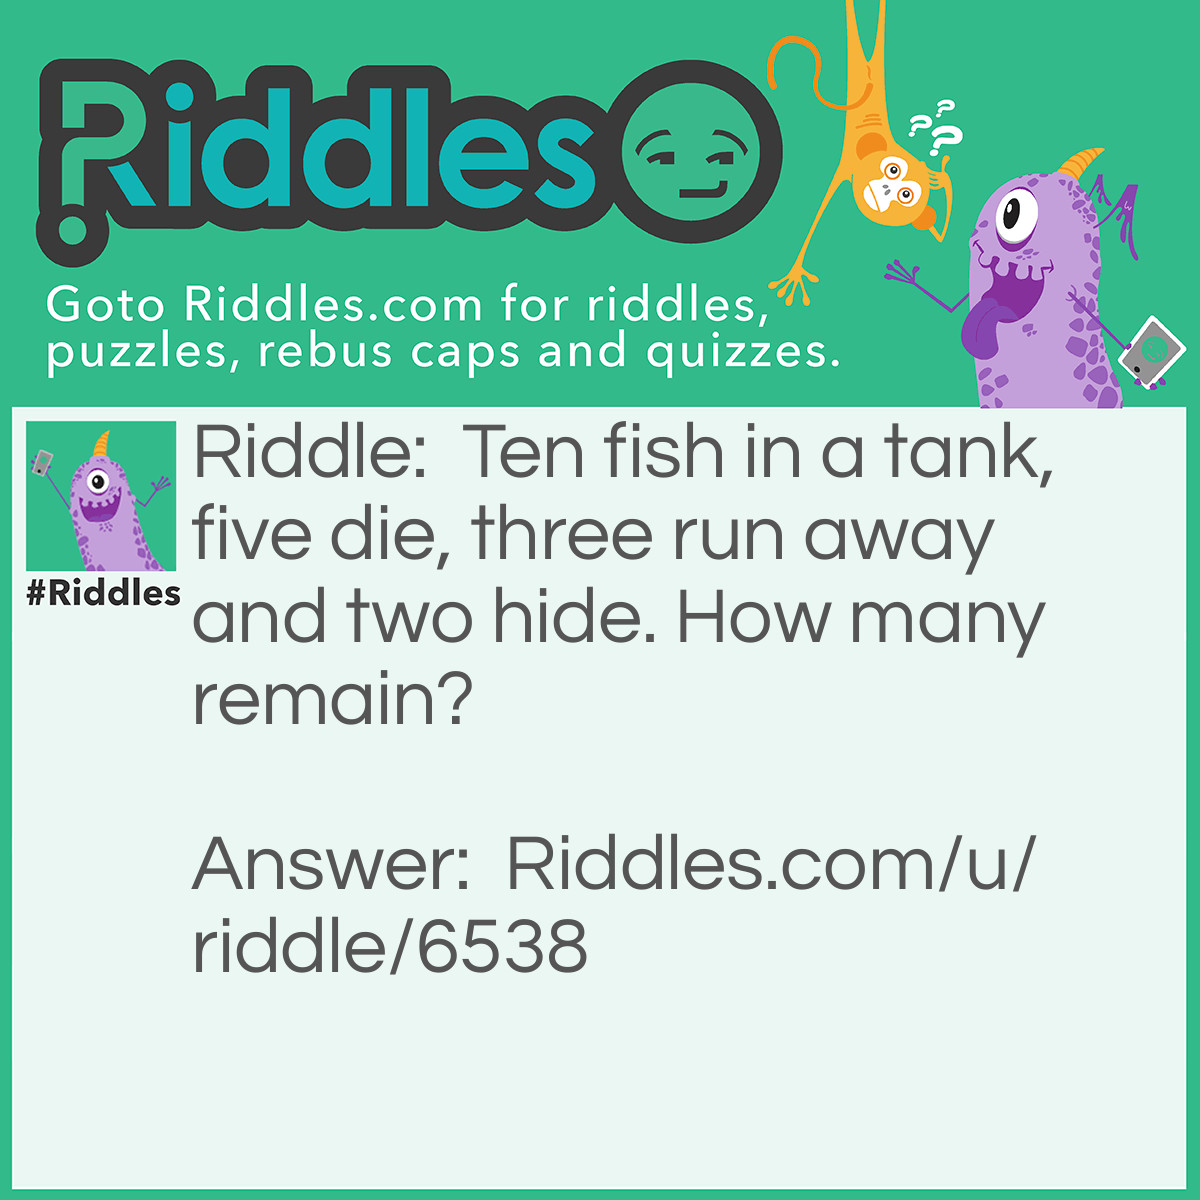 Riddle: Ten fish in a tank, five die, three run away and two hide. How many remain? Answer: Ten, non of them leave the tank.